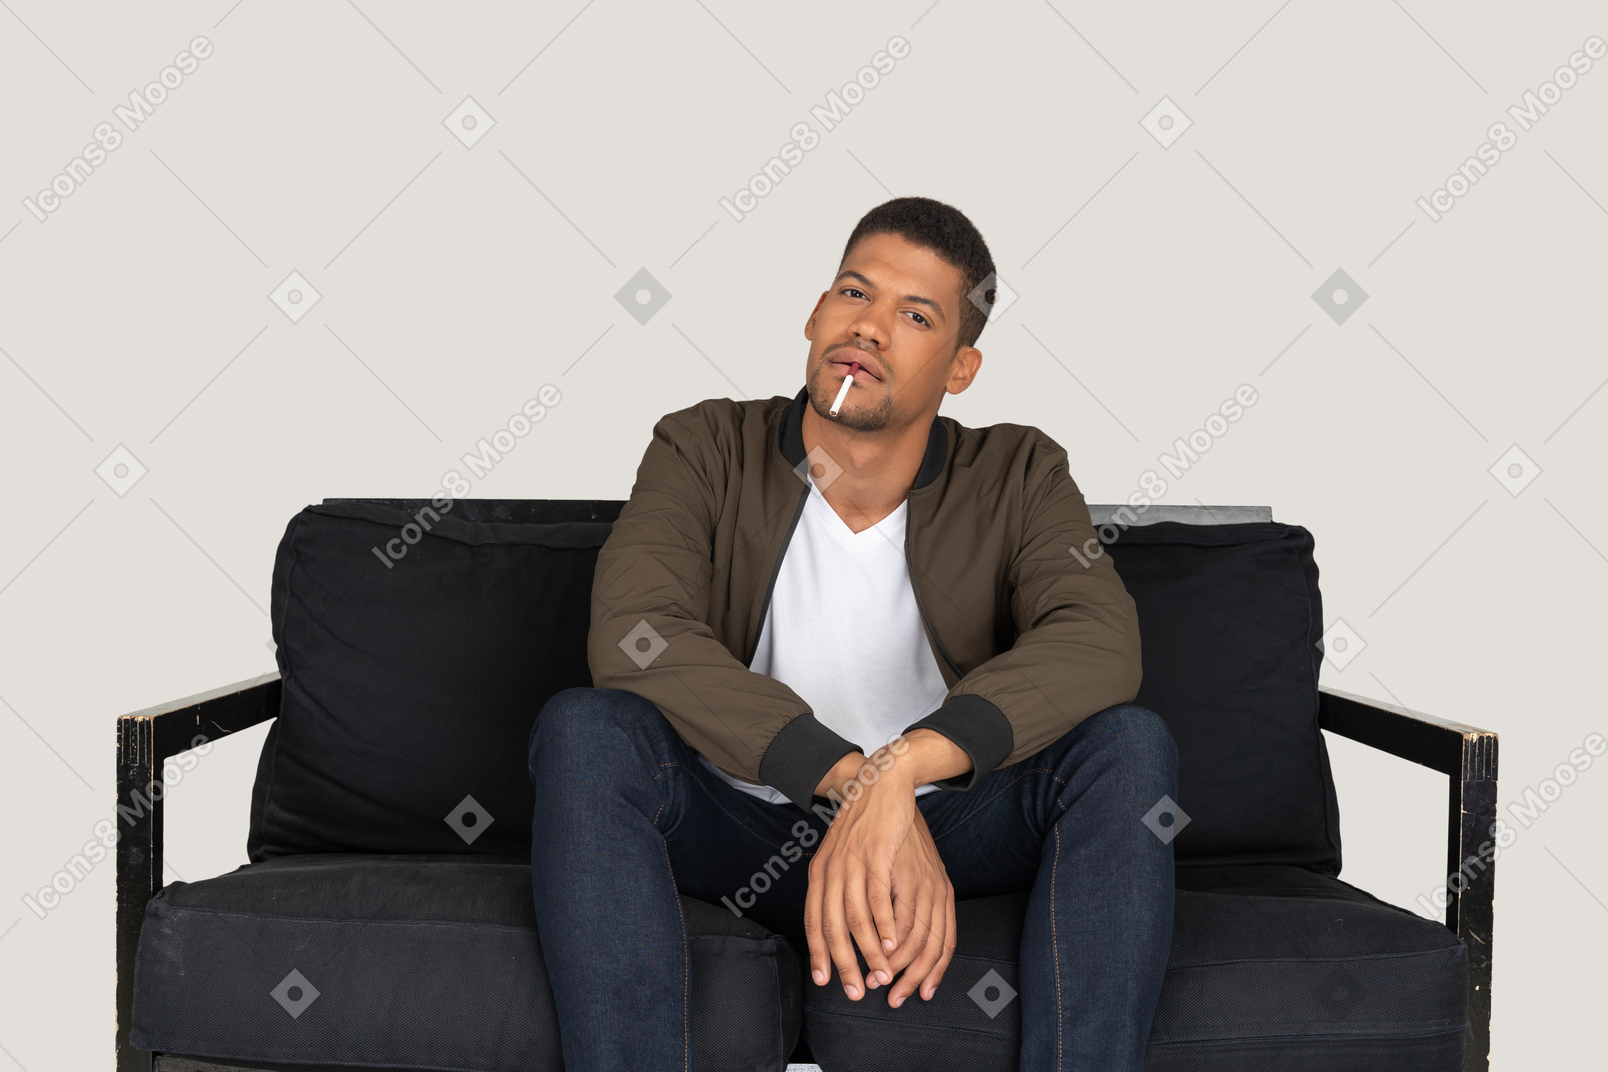 Front view of young man sitting on a sofa and holding cigarette in mouth